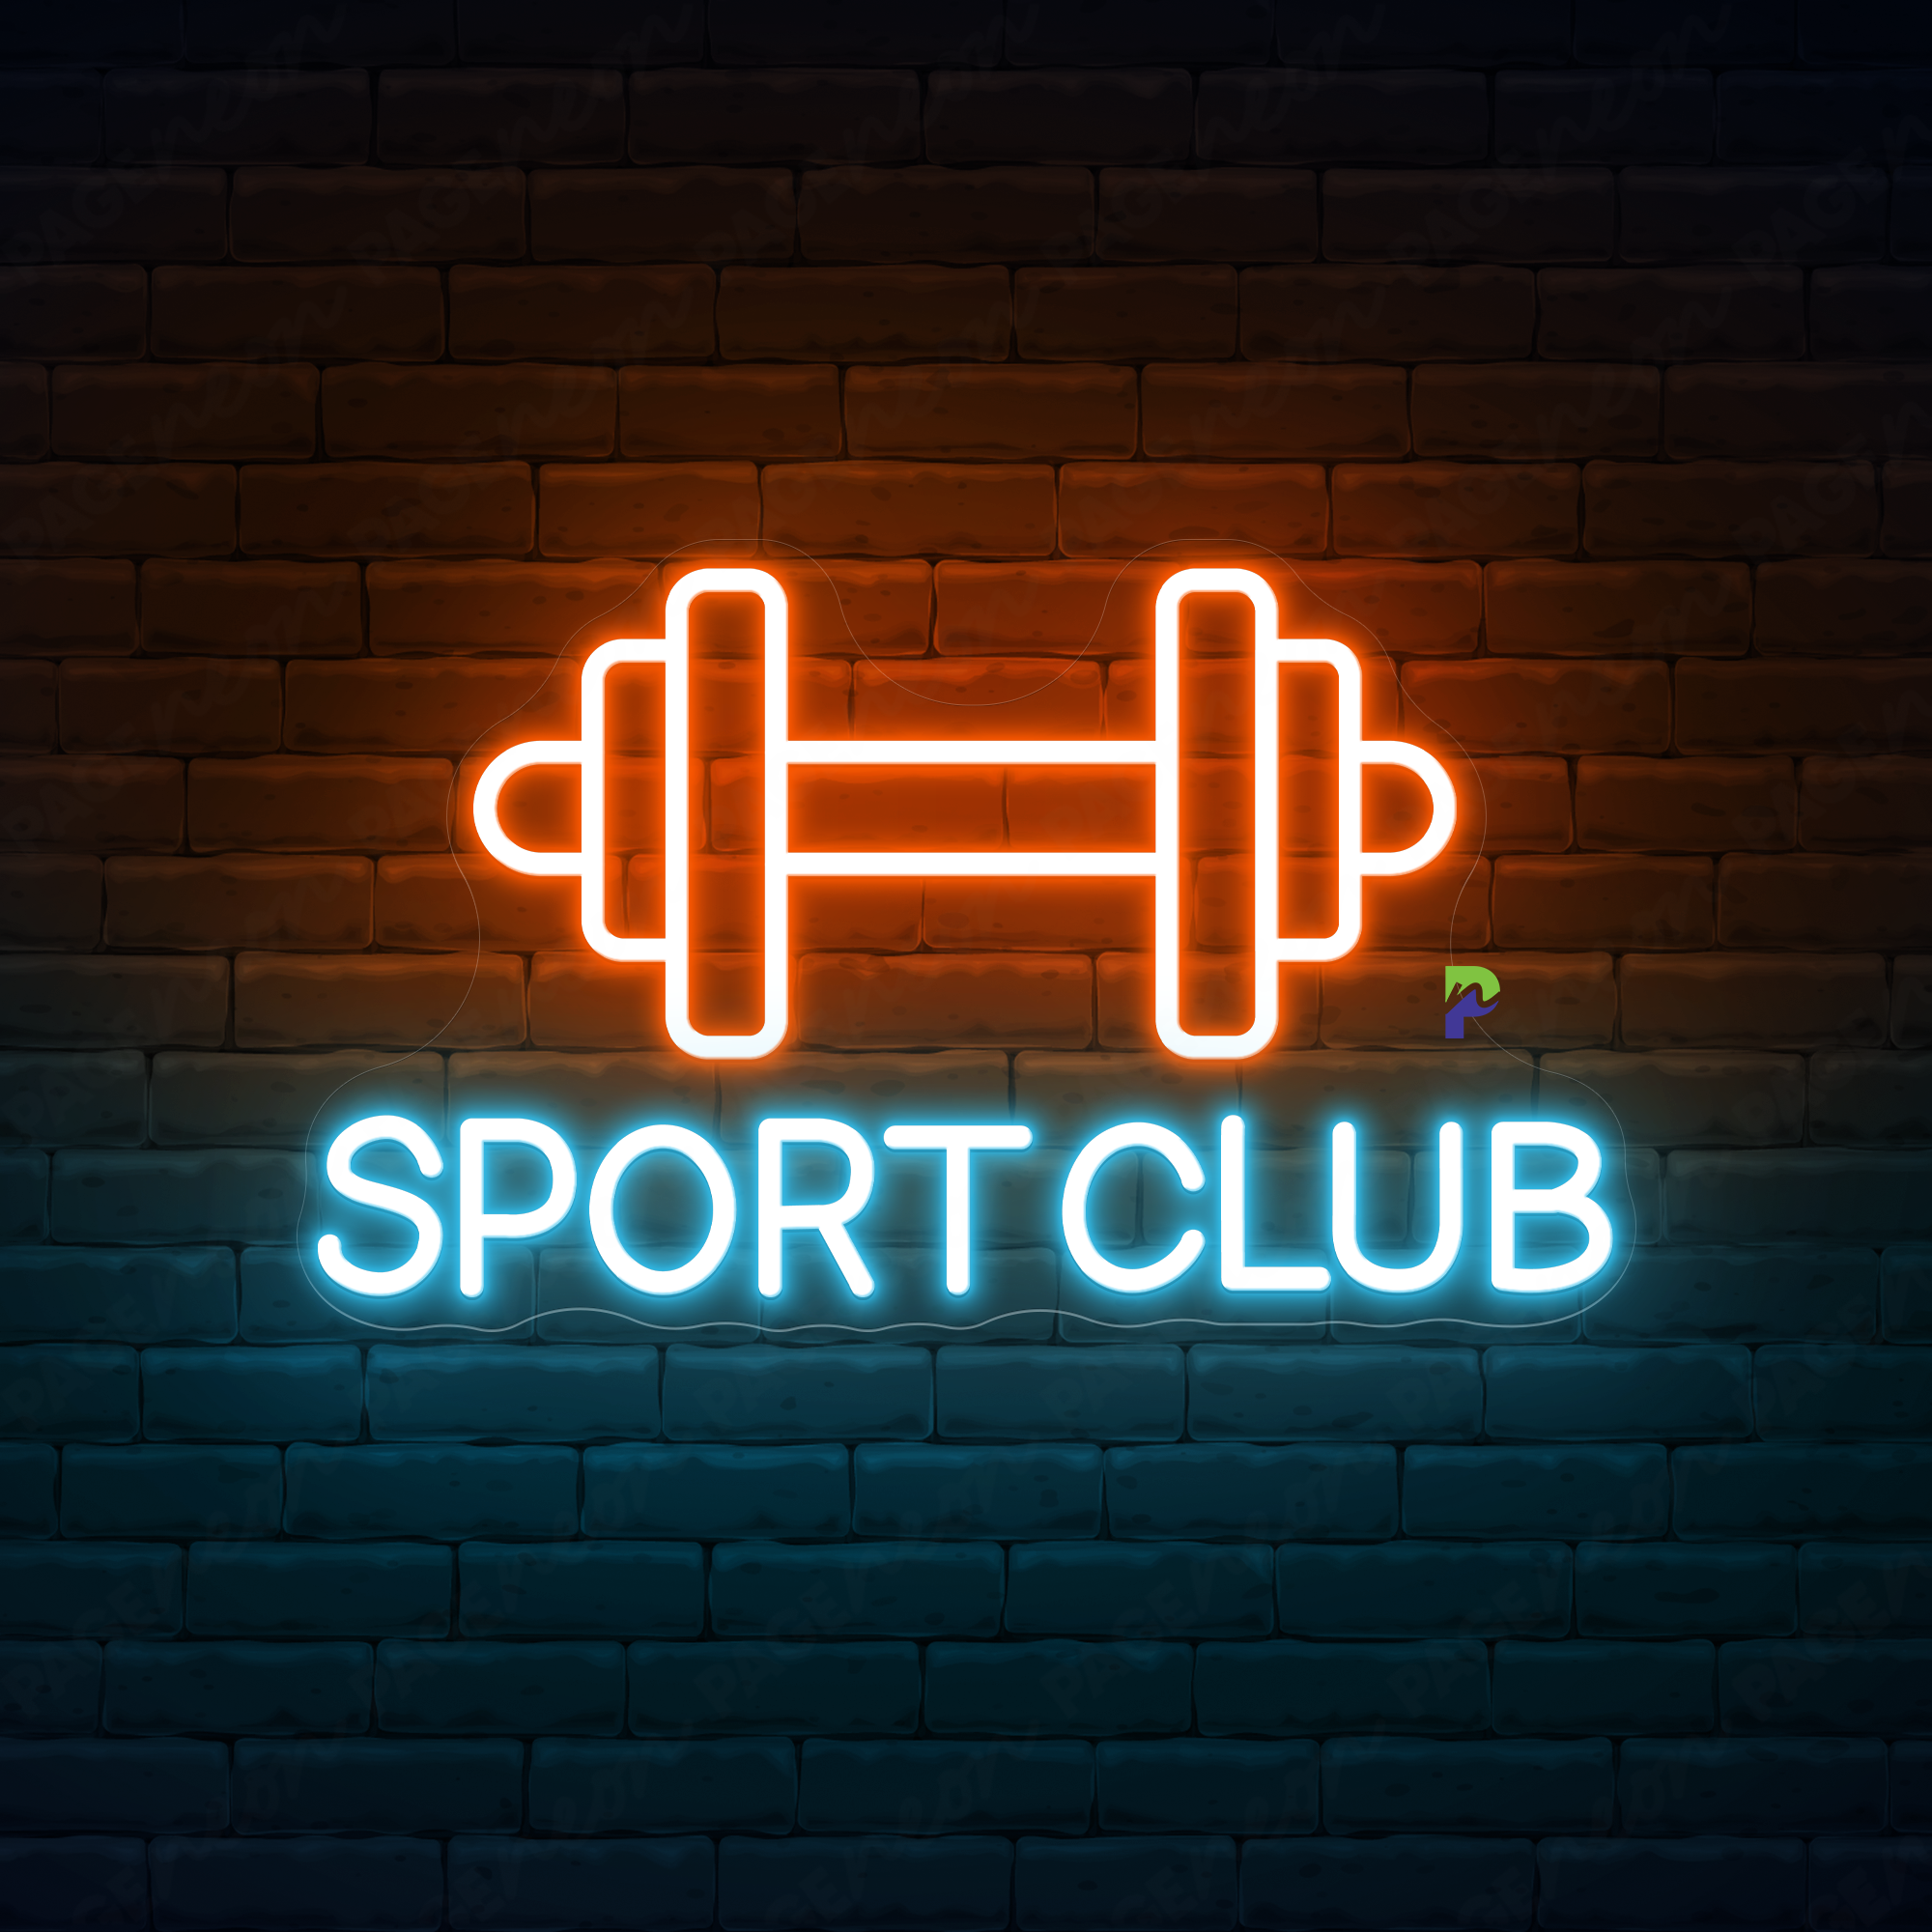 Sport Club Neon Sign Business Led Light